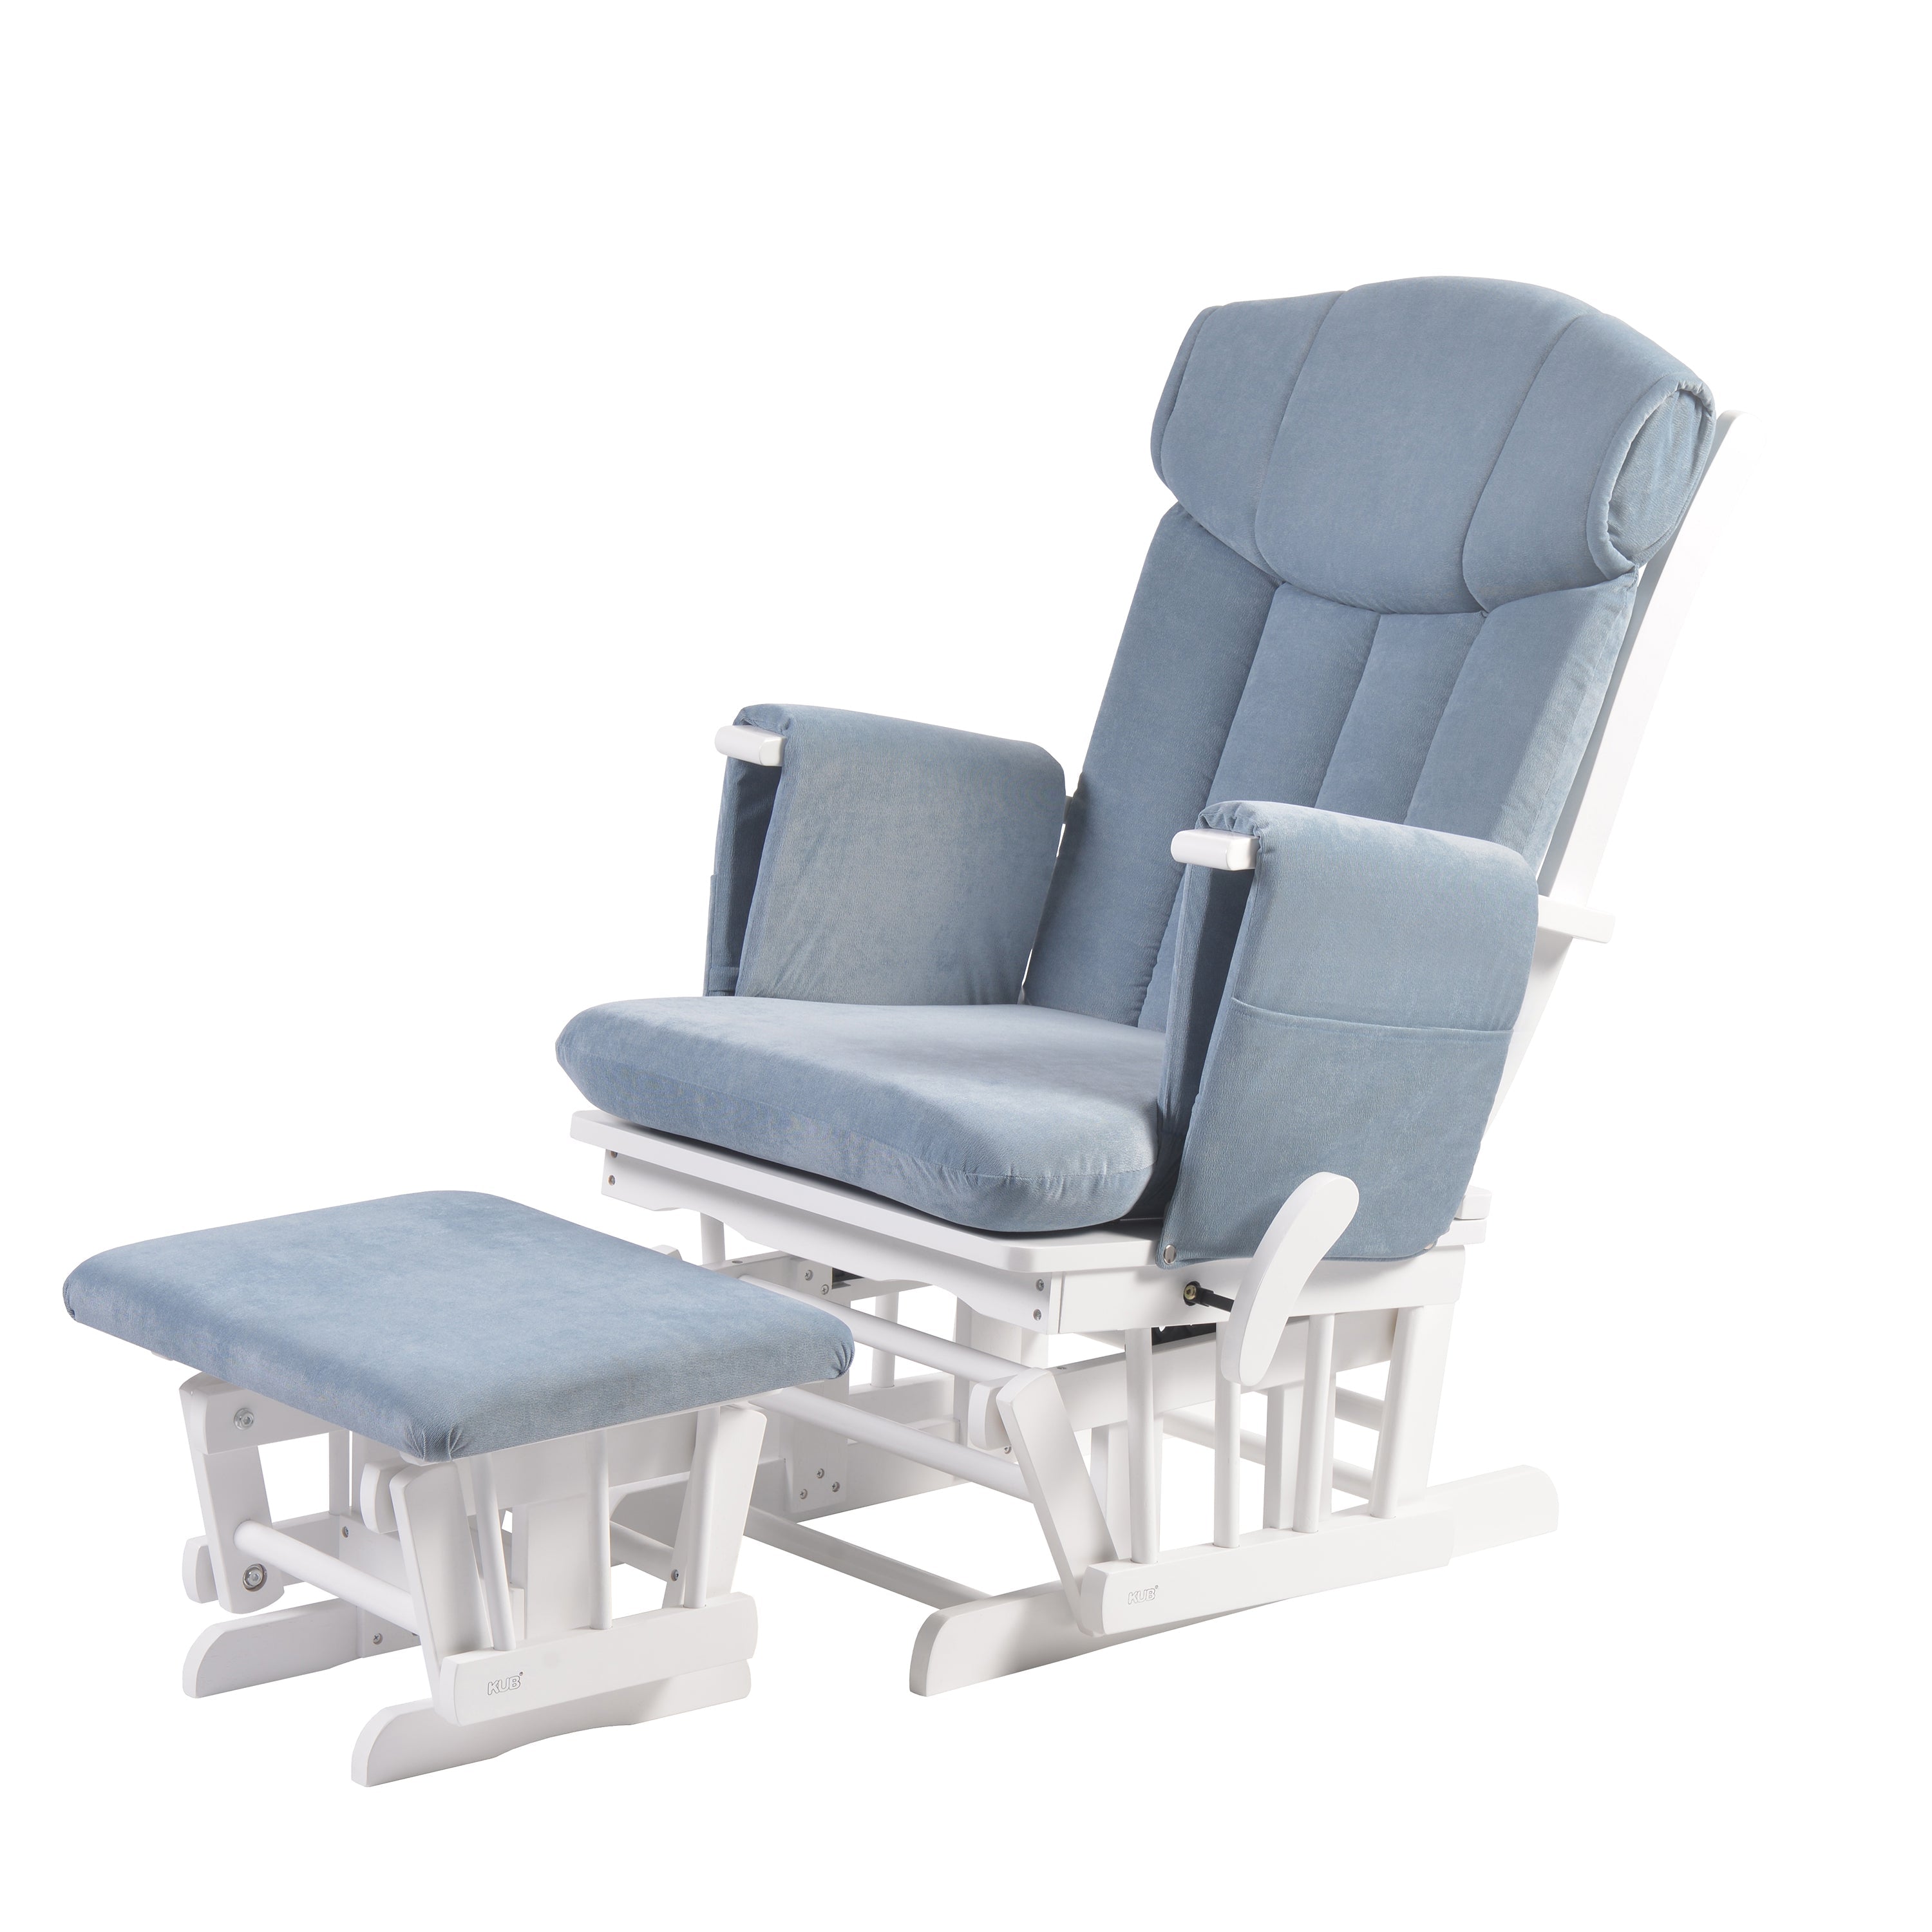 Chatsworth Nursing Chair and Footstool Slate Blue